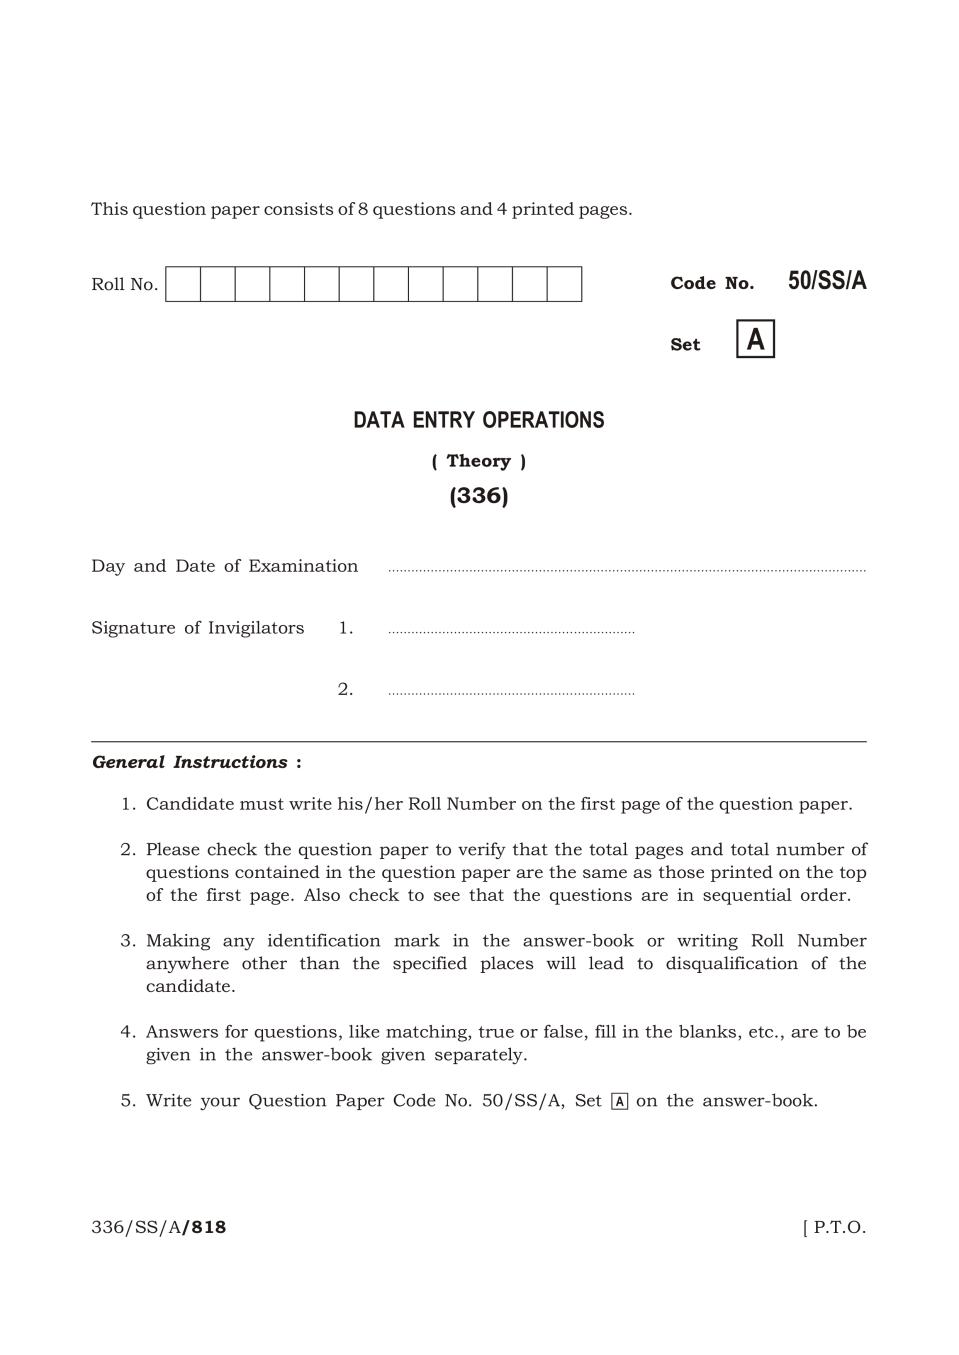 NIOS Class 12 Question Paper Apr 2015 - Data Entry Operations - Page 1